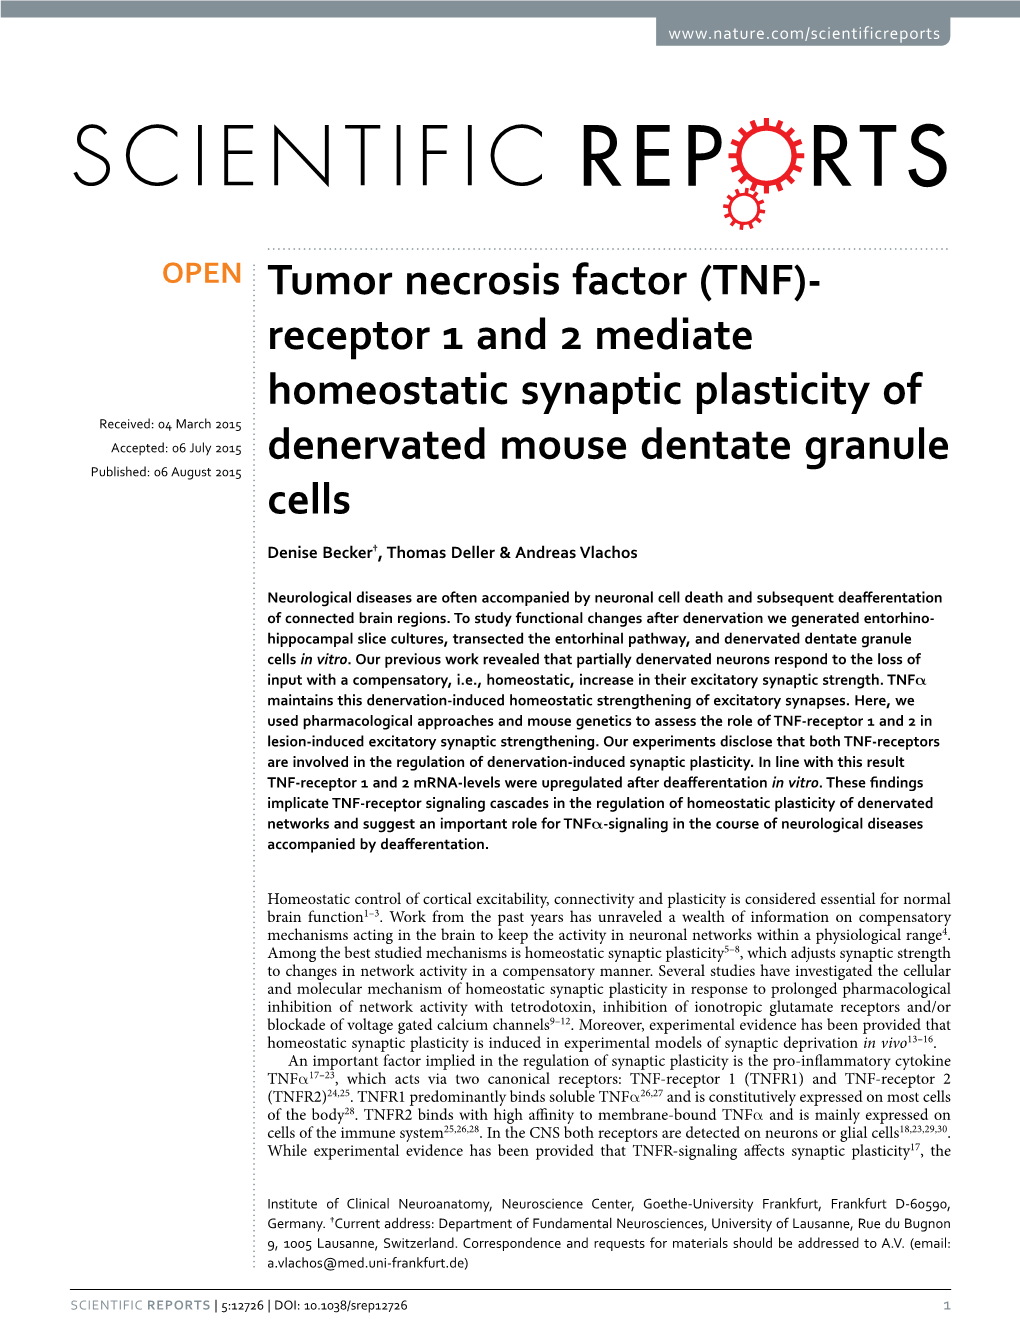 Tumor Necrosis Factor (TNF)-Receptor 1 and 2 Mediate Homeostatic Synaptic Plasticity of Denervated Mouse Dentate Granule Cells